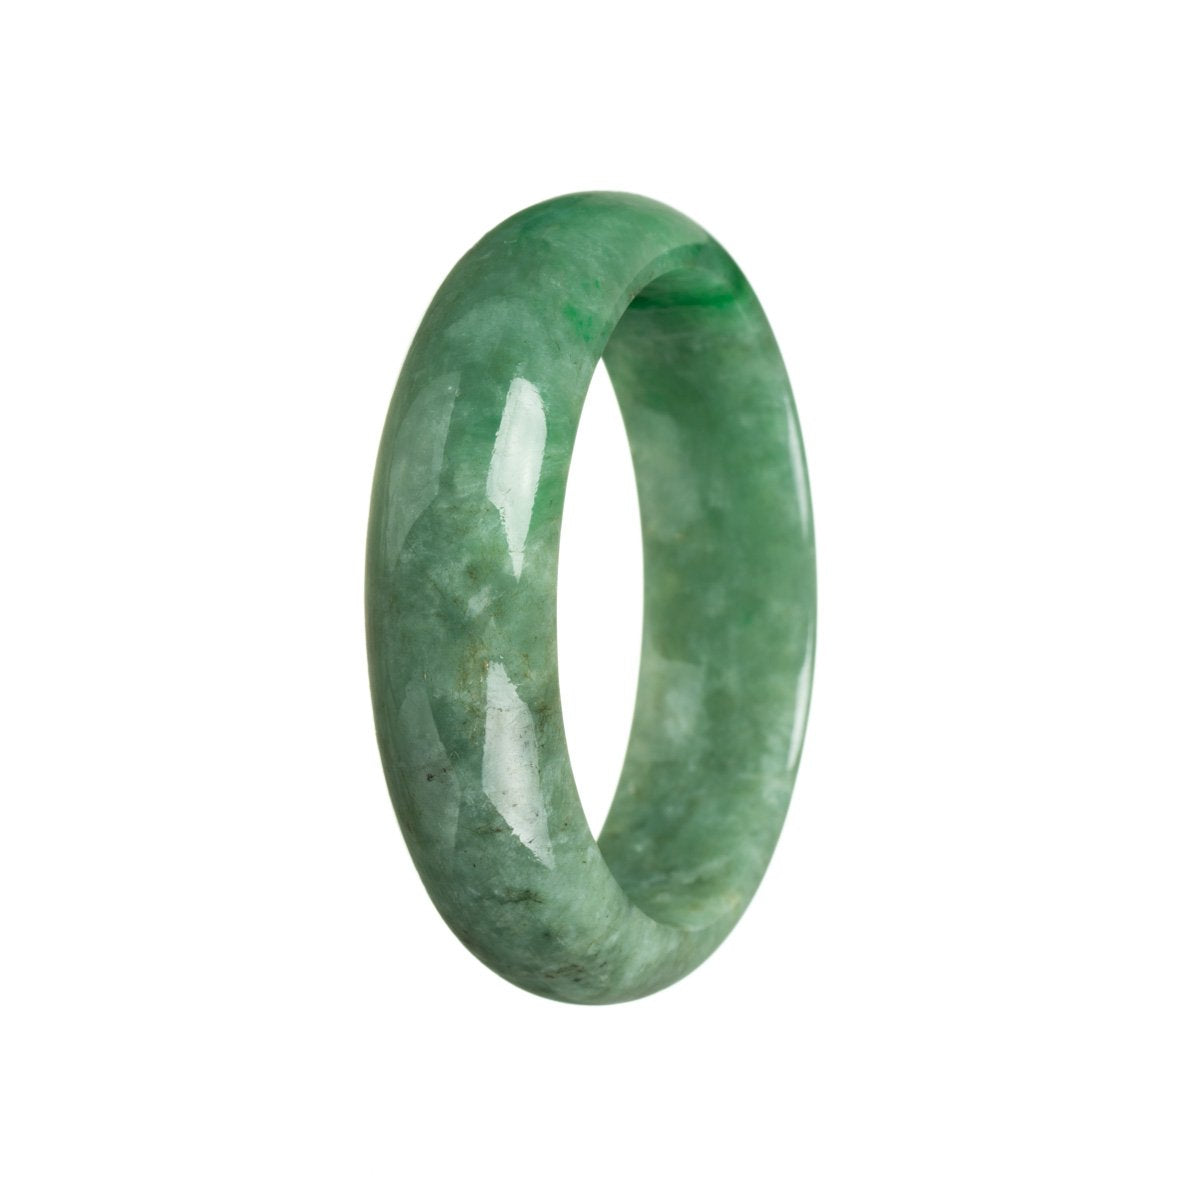 A beautiful half moon-shaped jadeite bracelet in genuine untreated Imperial green sections. Perfect for adding a touch of elegance to any outfit.